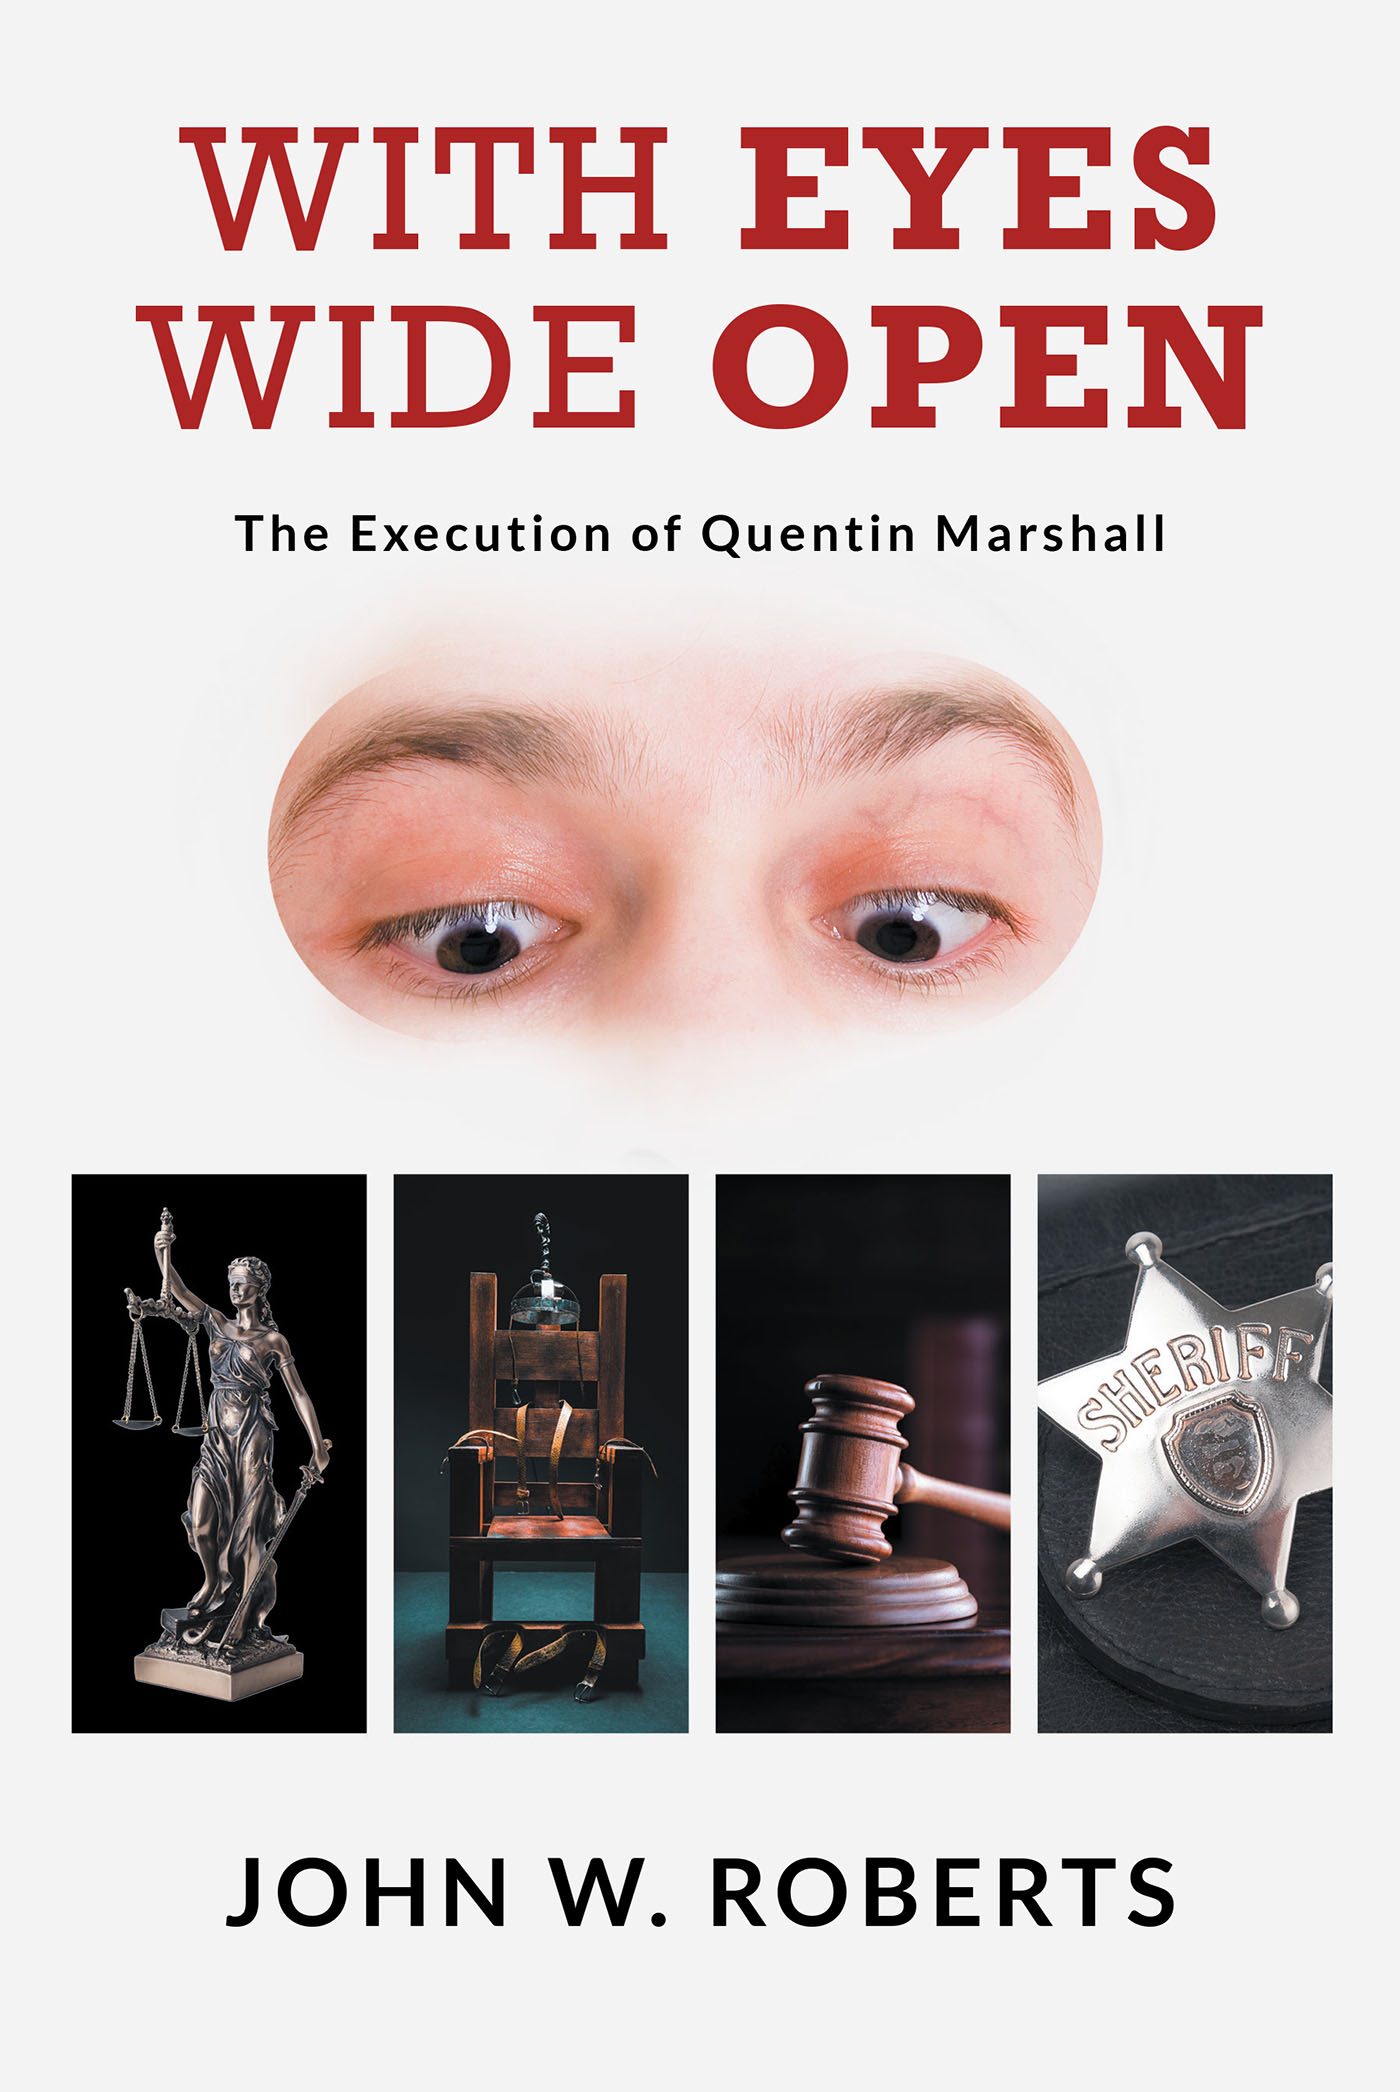 Author John W. Roberts’ New Book, "With Eyes Wide Open," is the Story of Quentin Marshall and His False Charge of Rape and Murder